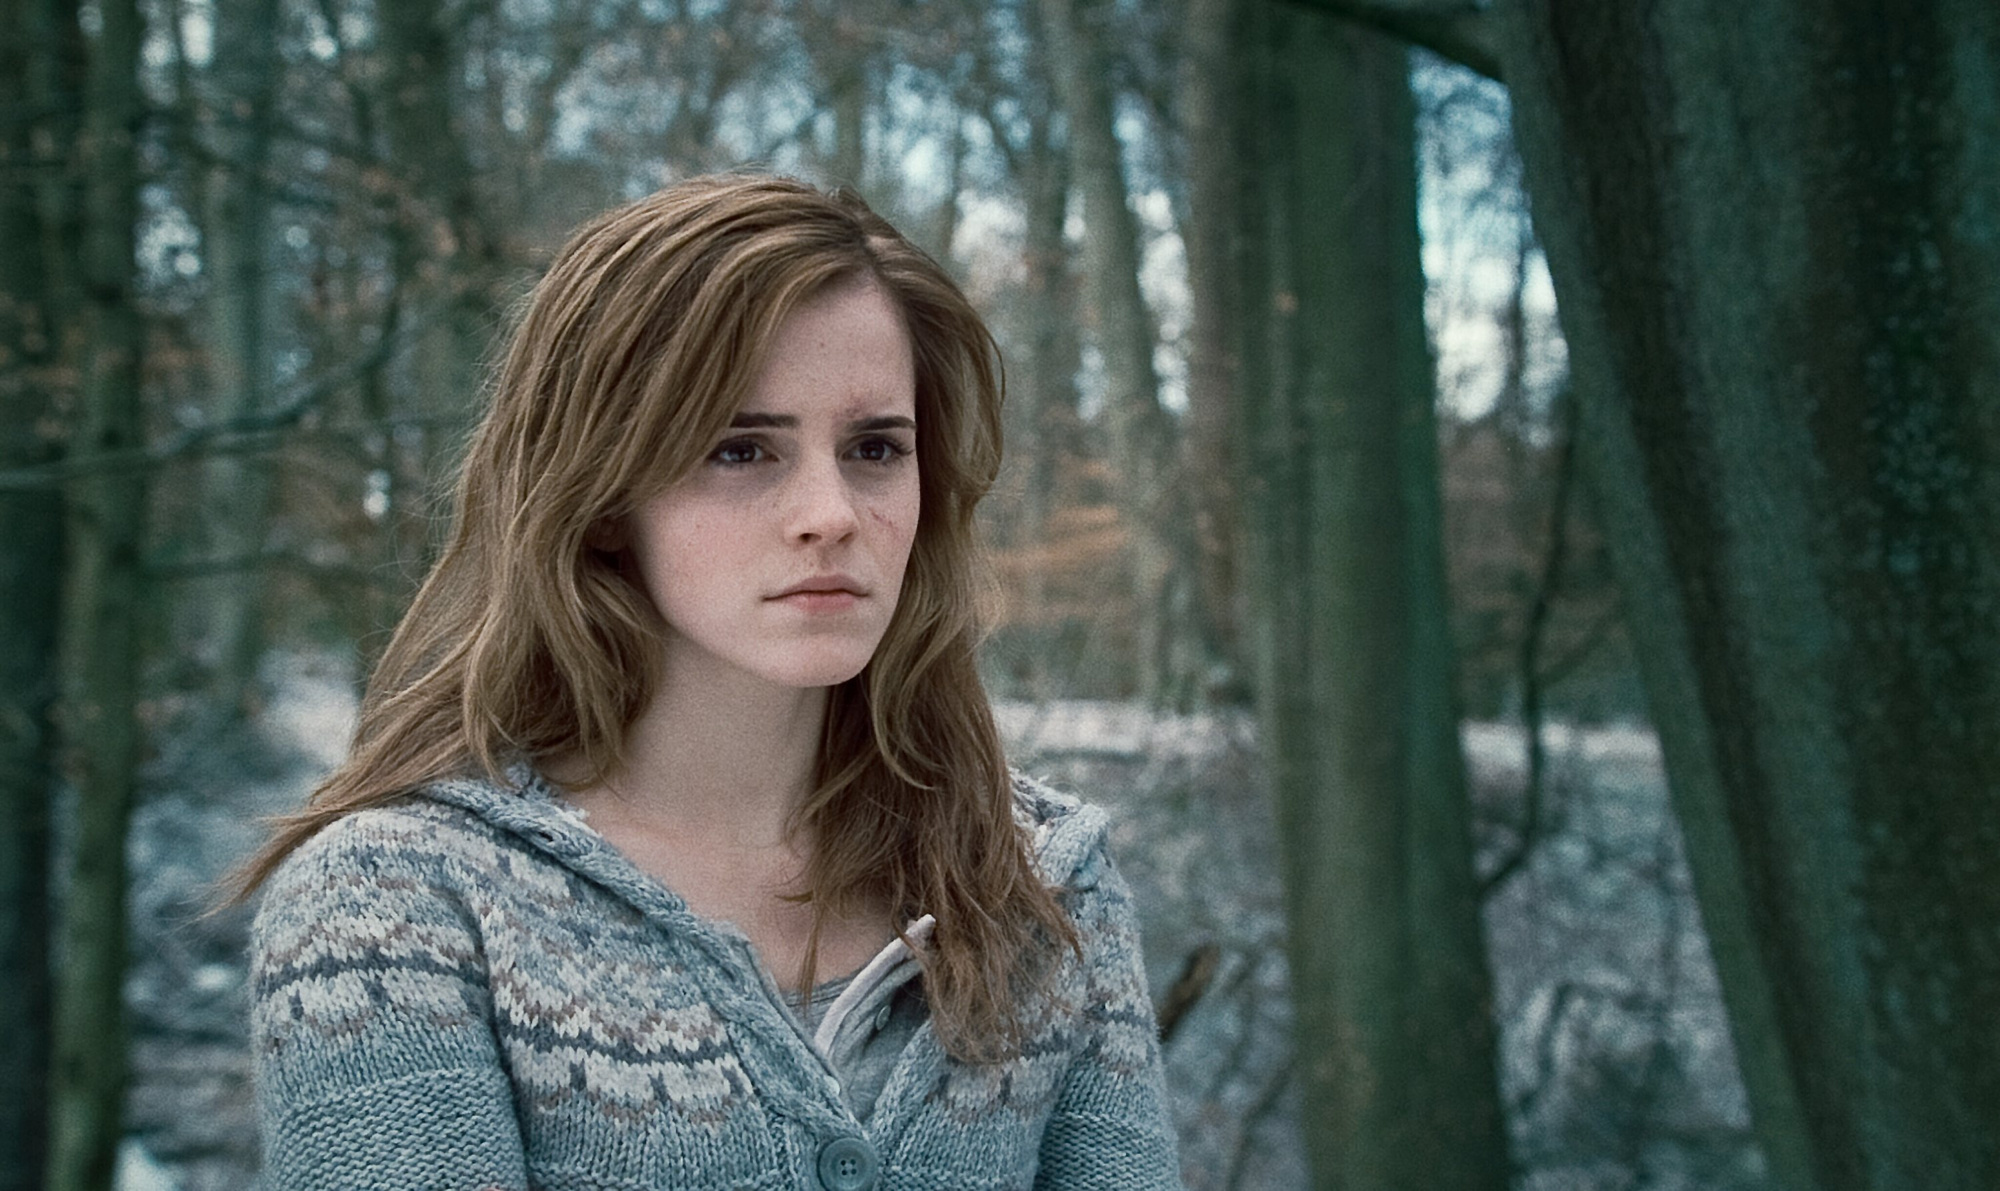 emma watson, harry potter, movie, harry potter and the deathly hallows: part 1, hermione granger Desktop home screen Wallpaper